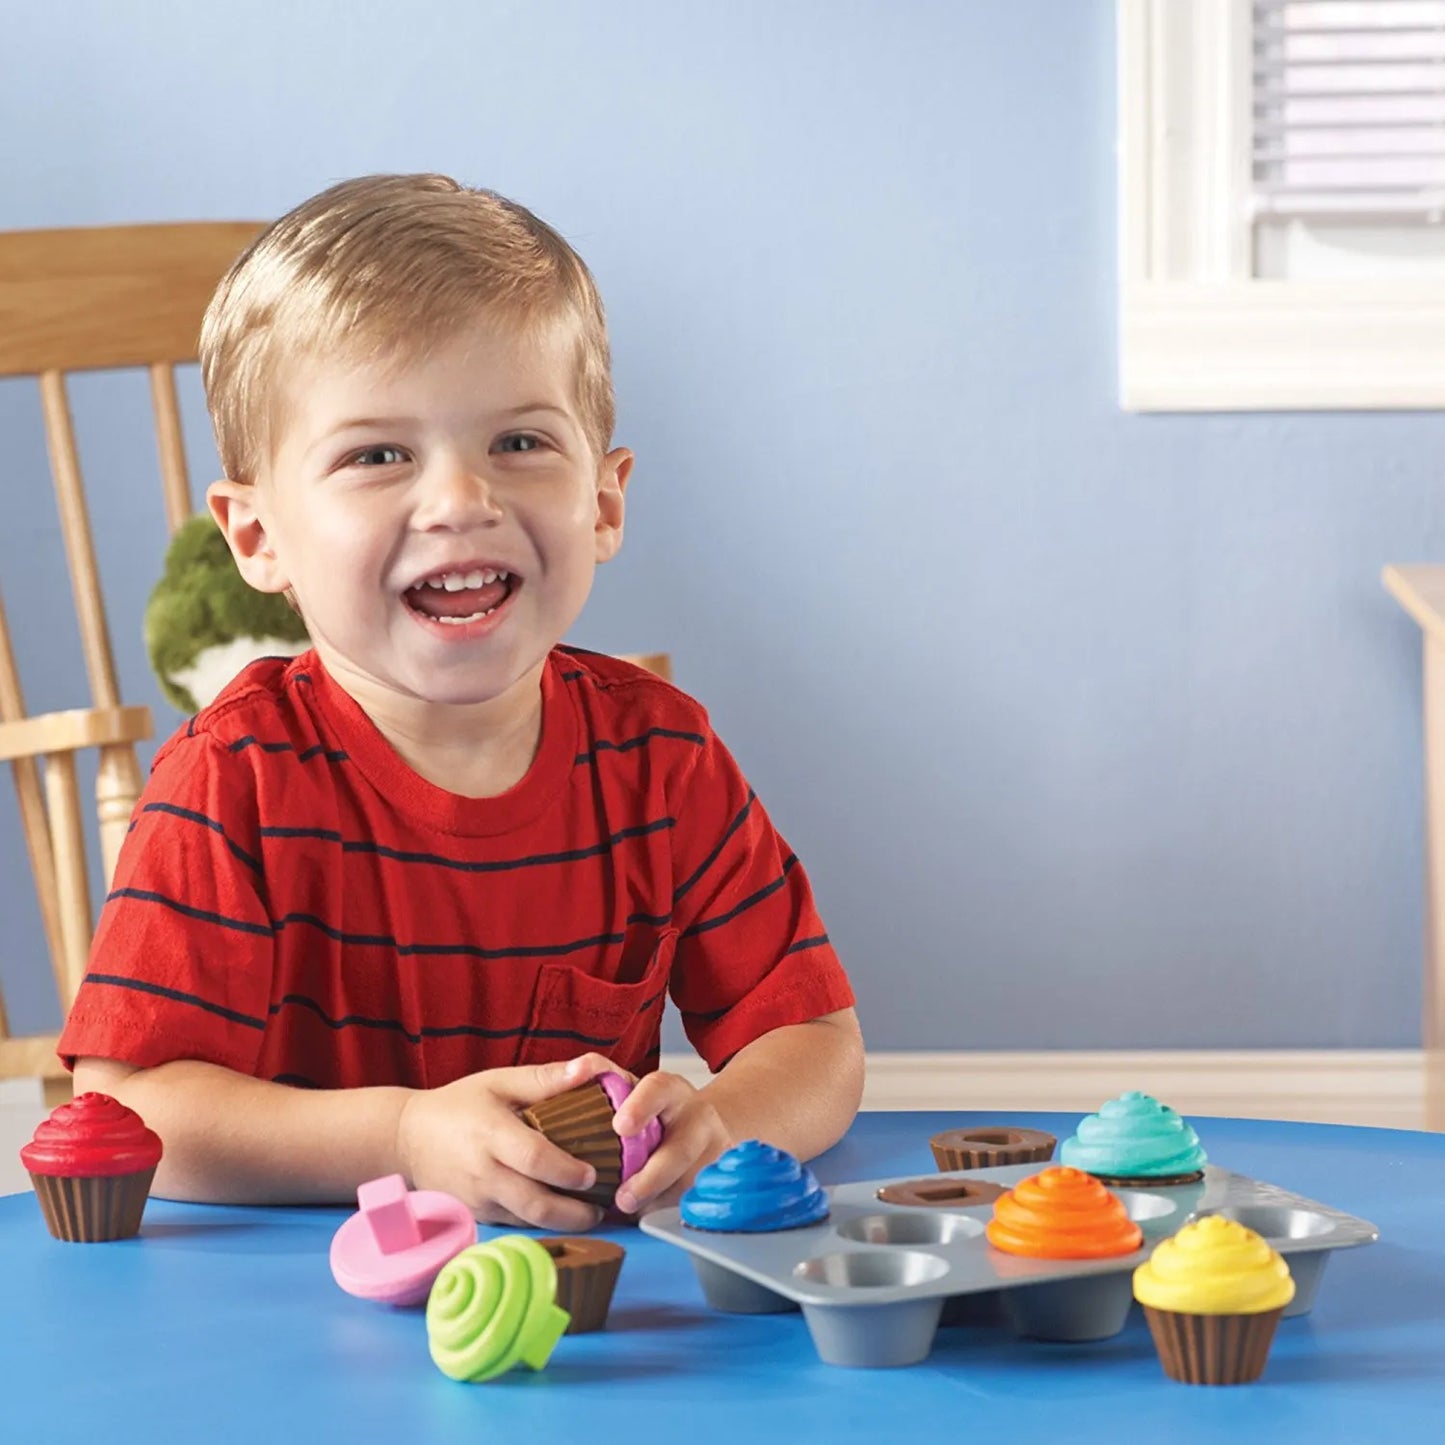 Learning Resources Smart Snacks Shape Sorting Cupcakes